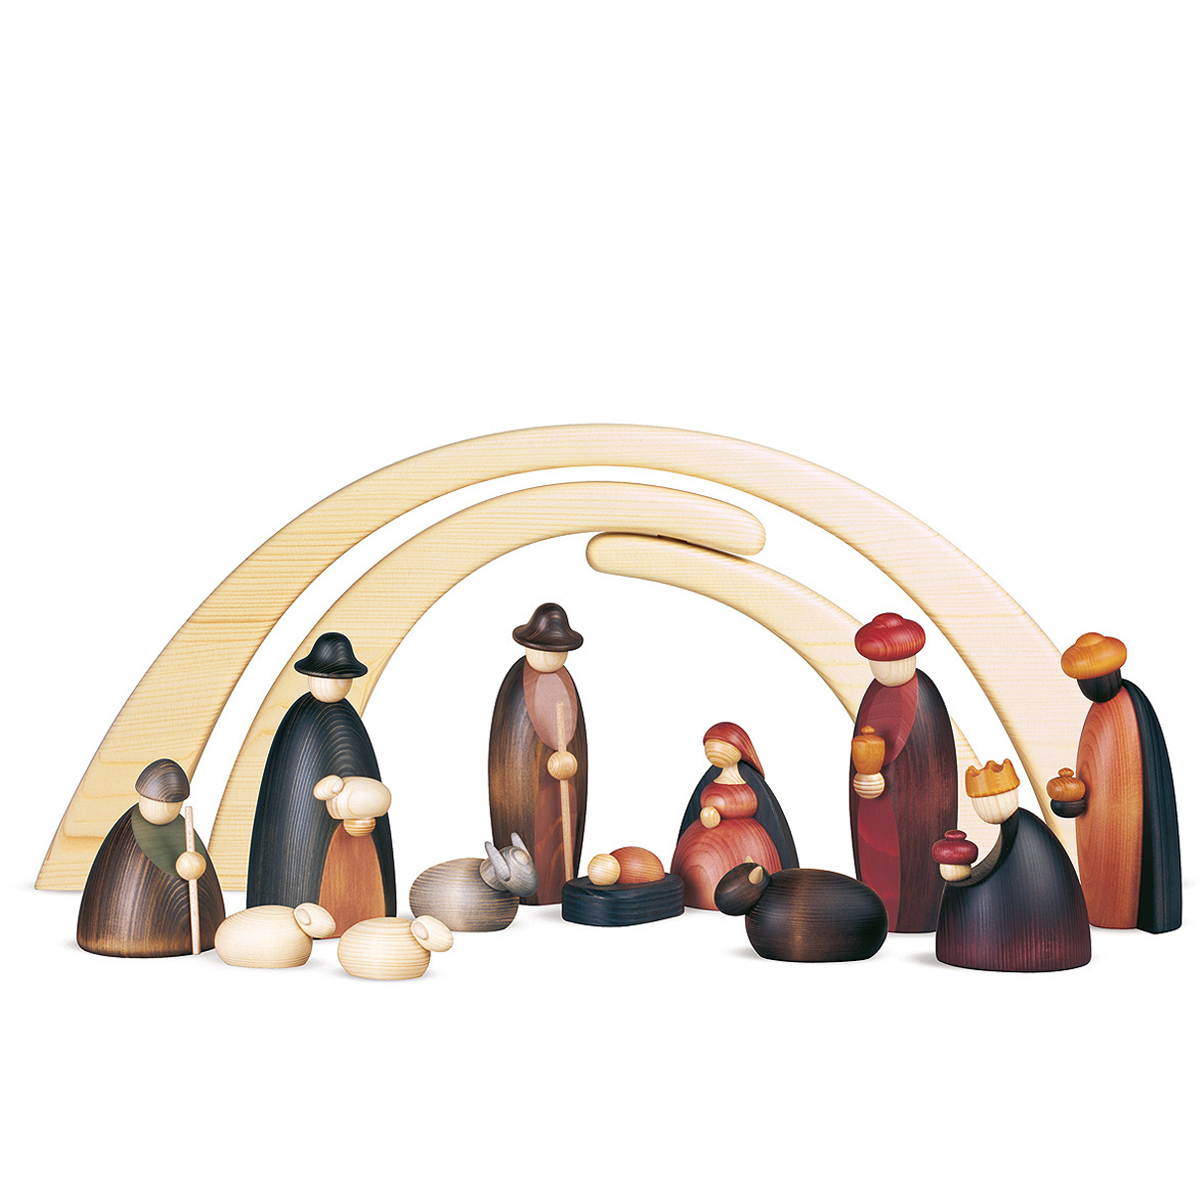  Set of 12 crib figures with stable, large